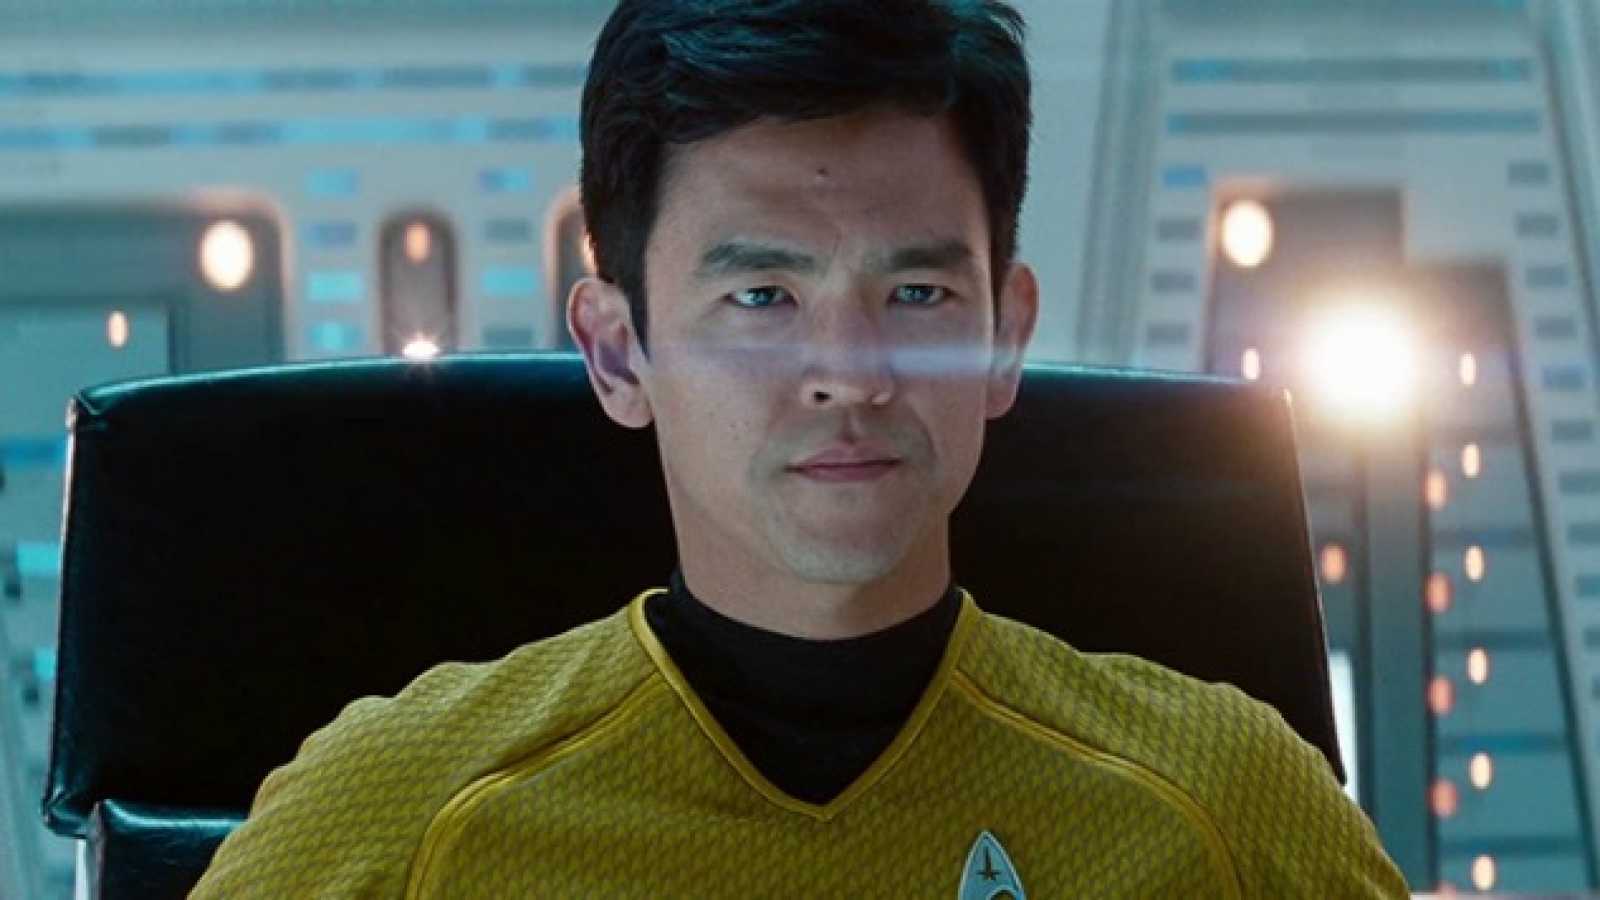 Star Trek Beyond's John Cho: 'I've Been Wanting to See a Personal Side of Sulu' of Geek